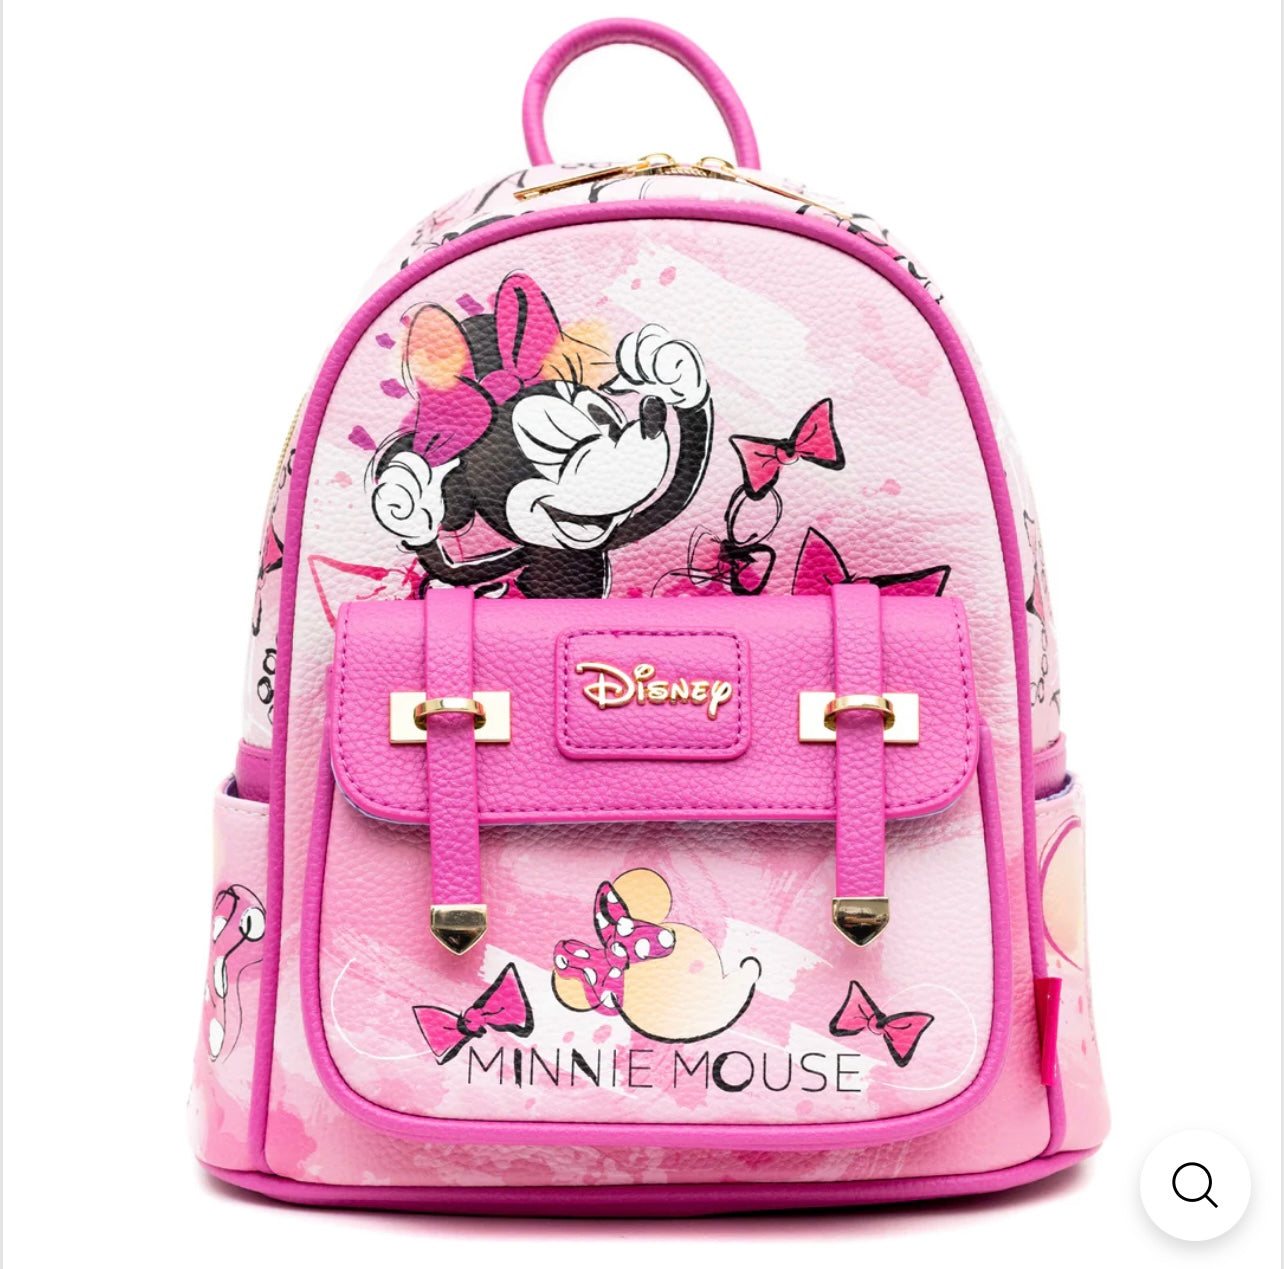 Exclusive Limited Edition- Pink Minnie Mouse Vegan Leather Backpack